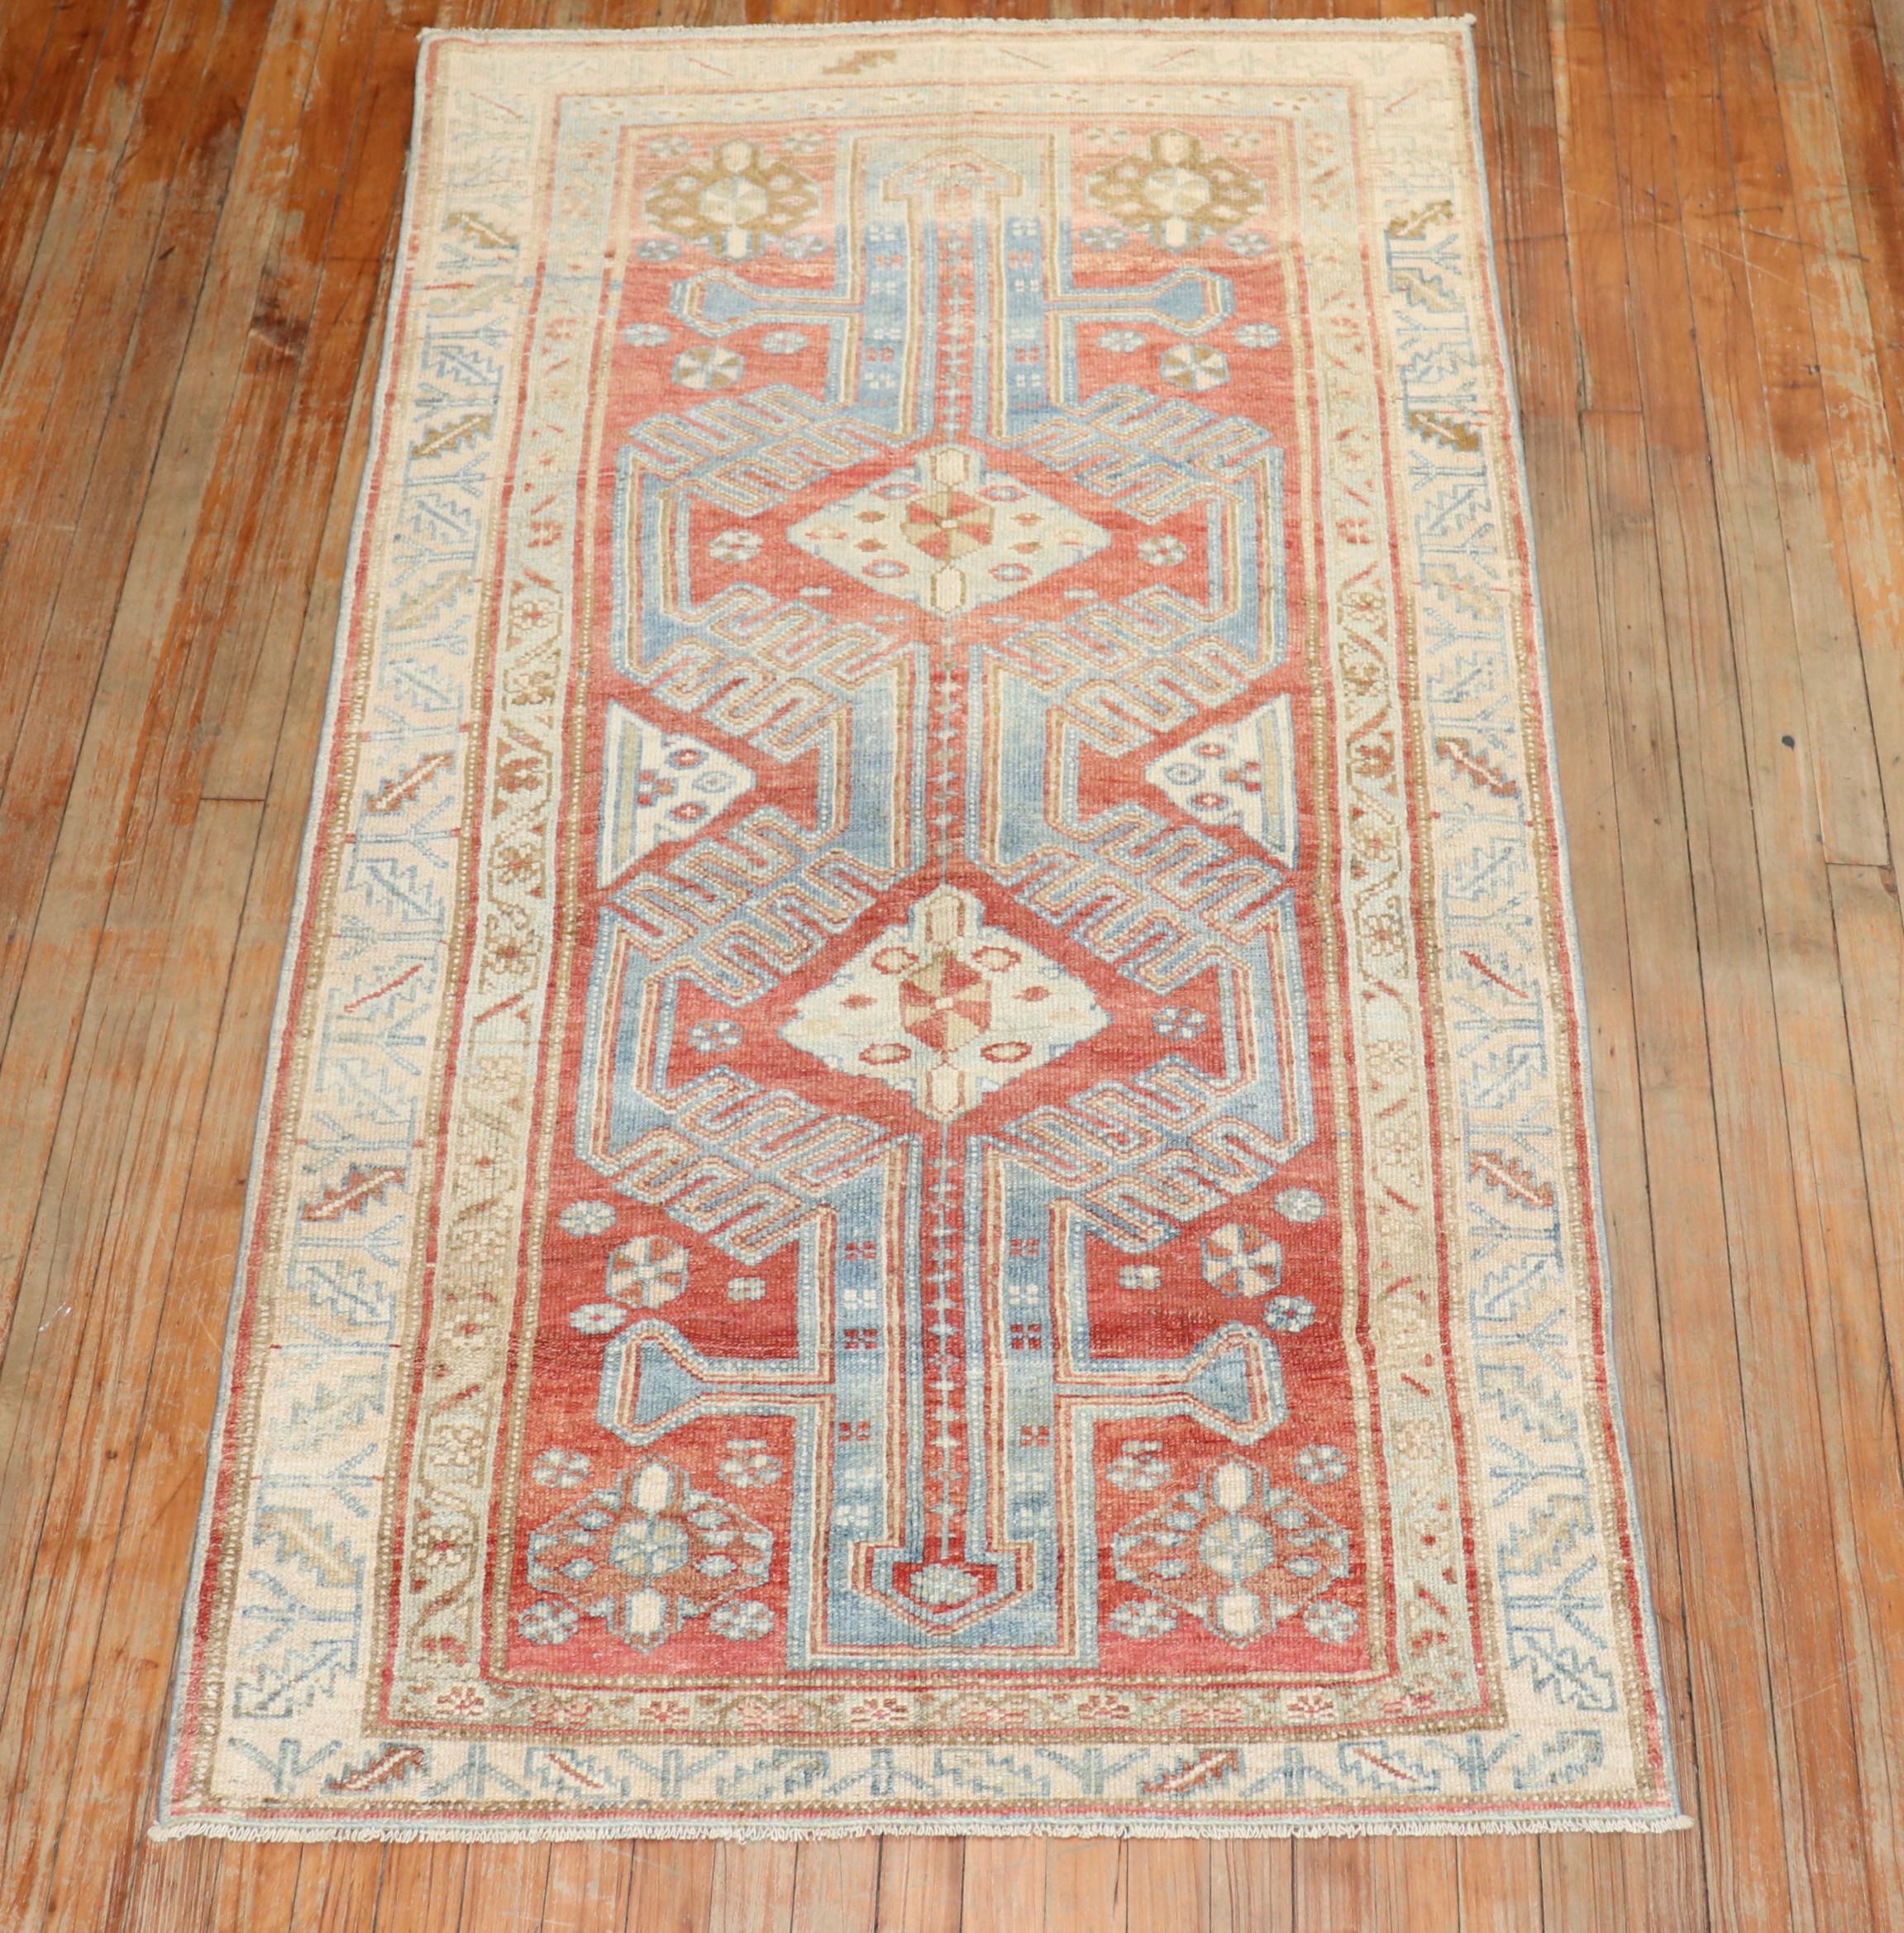 An early 20th Century Geometric Persian Malayer in red, blue and cream

Measures: 3'6'' x 6'5''.